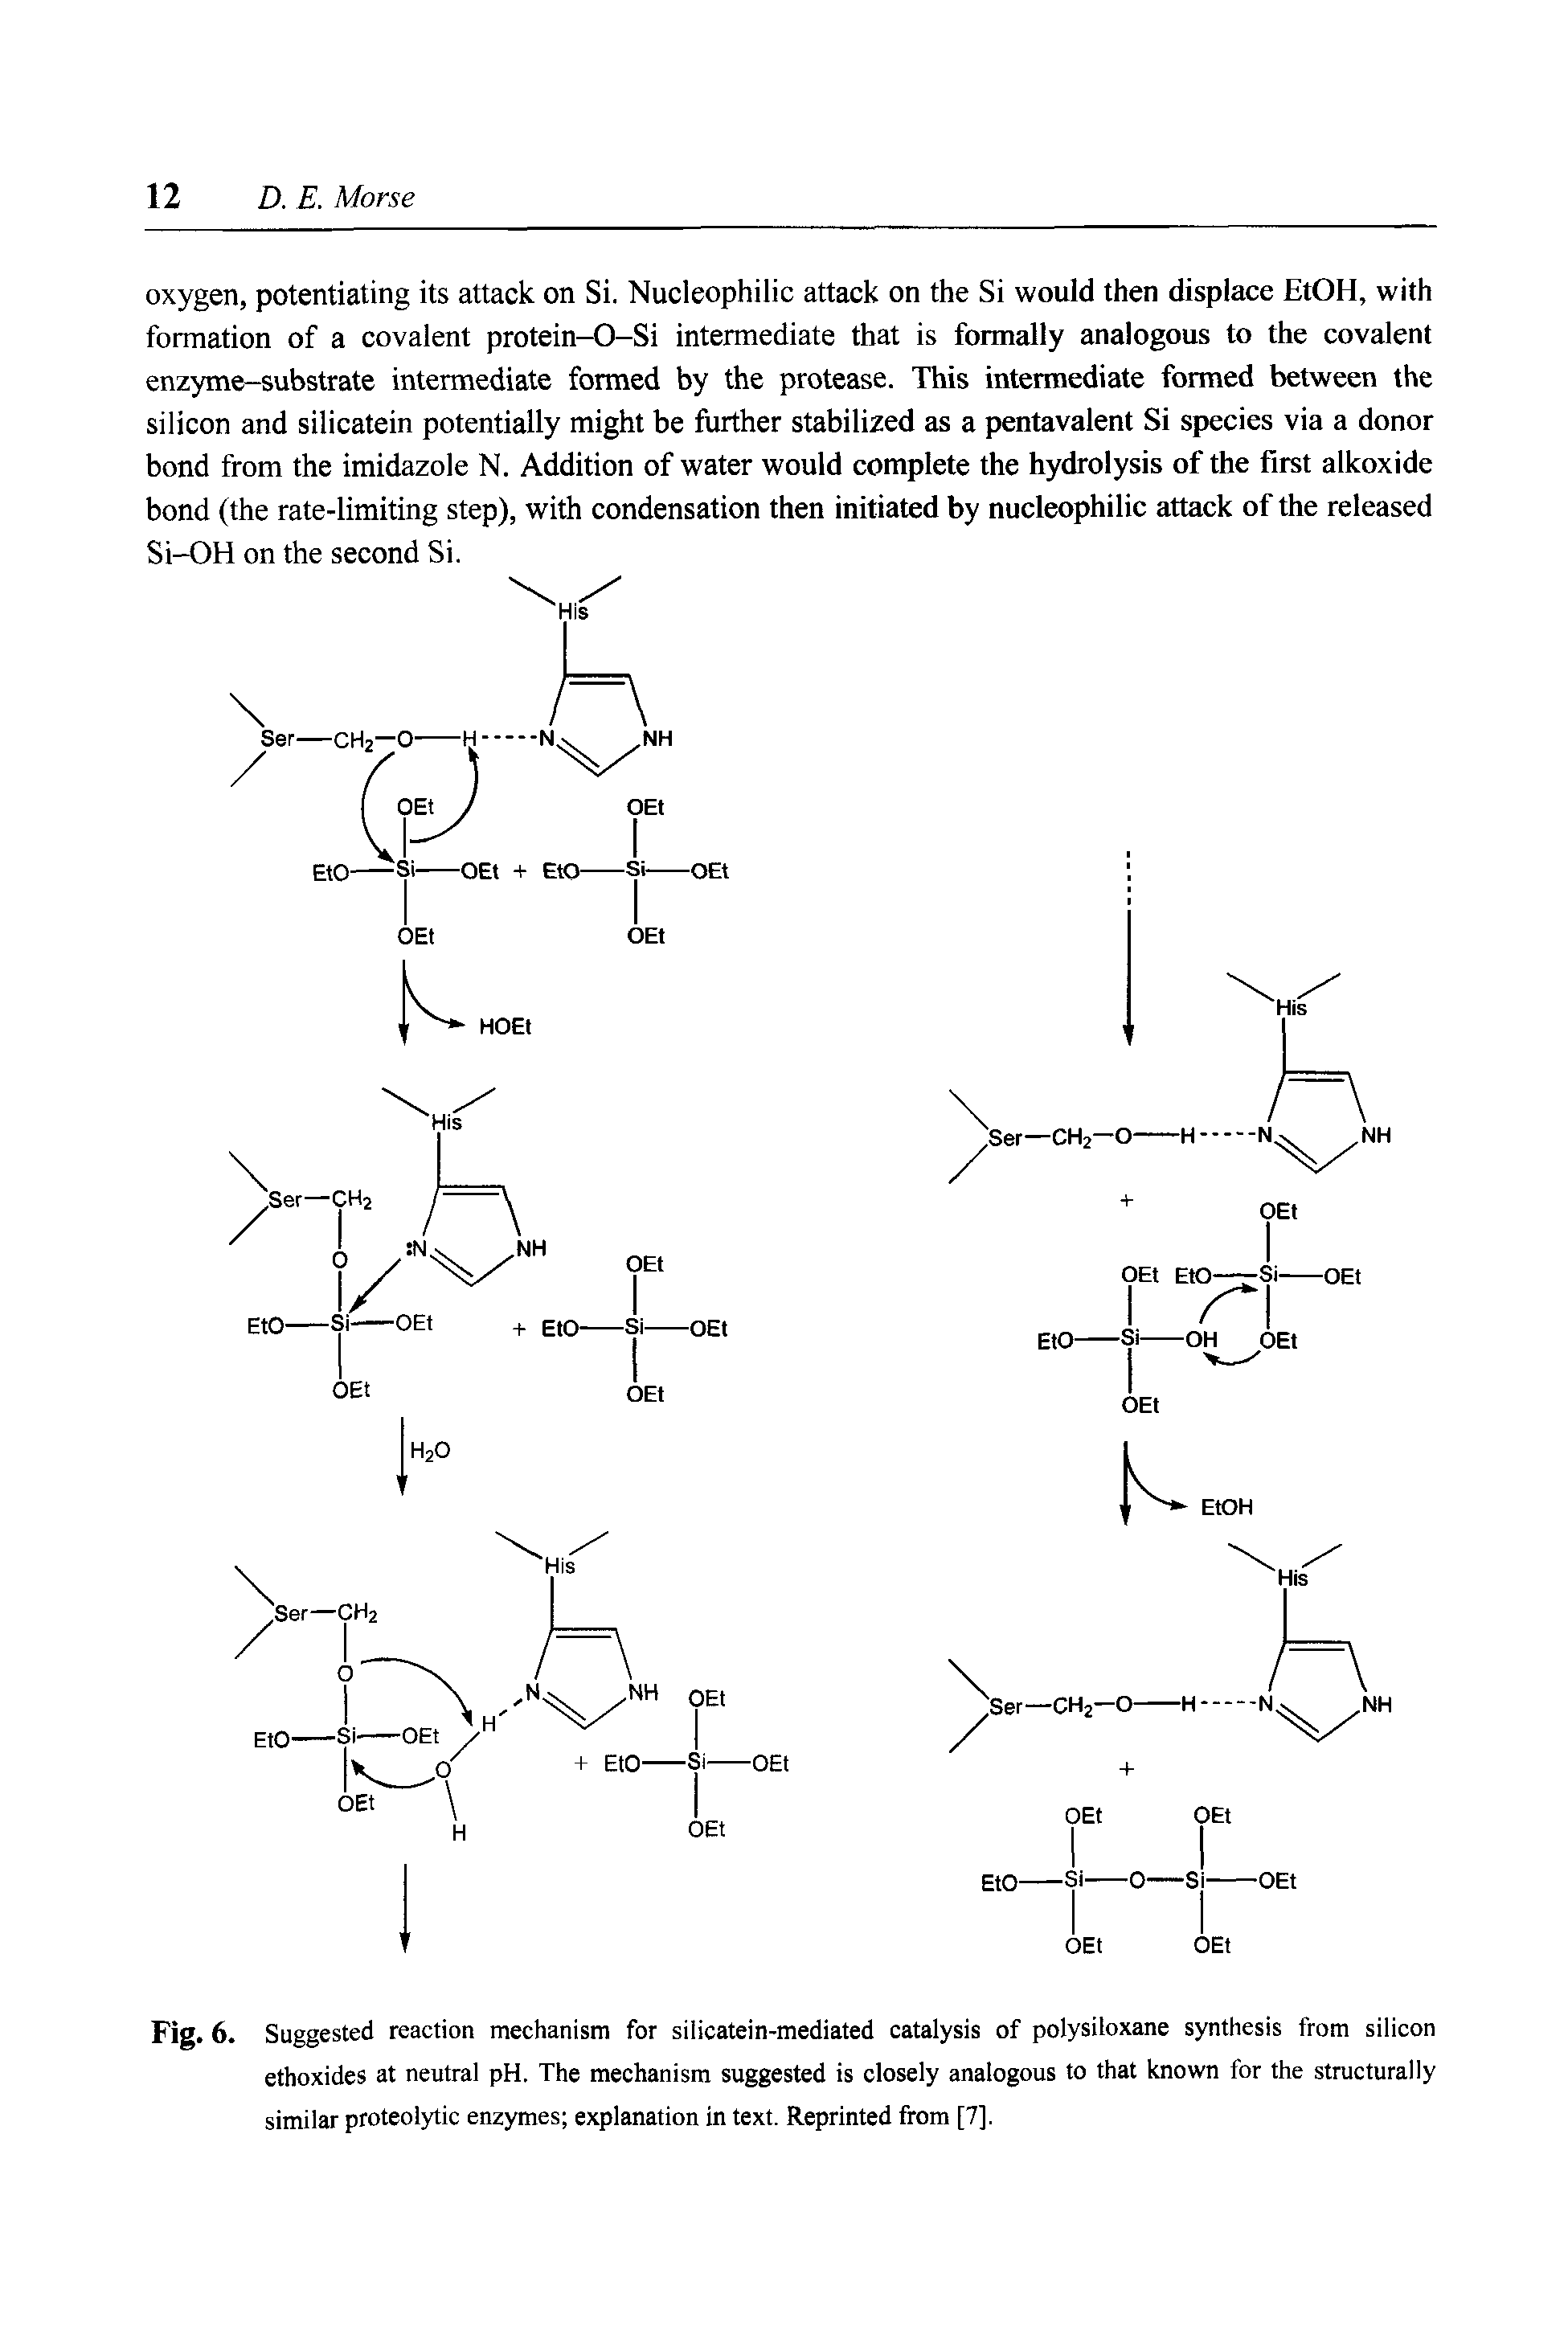 Fig. 6. Suggested reaction mechanism for silicatein-mediated catalysis of polysiloxane synthesis from silicon ethoxides at neutral pH. The mechanism suggested is closely analogous to that known for the structurally similar proteolytic enzymes explanation in text. Reprinted from [7],...